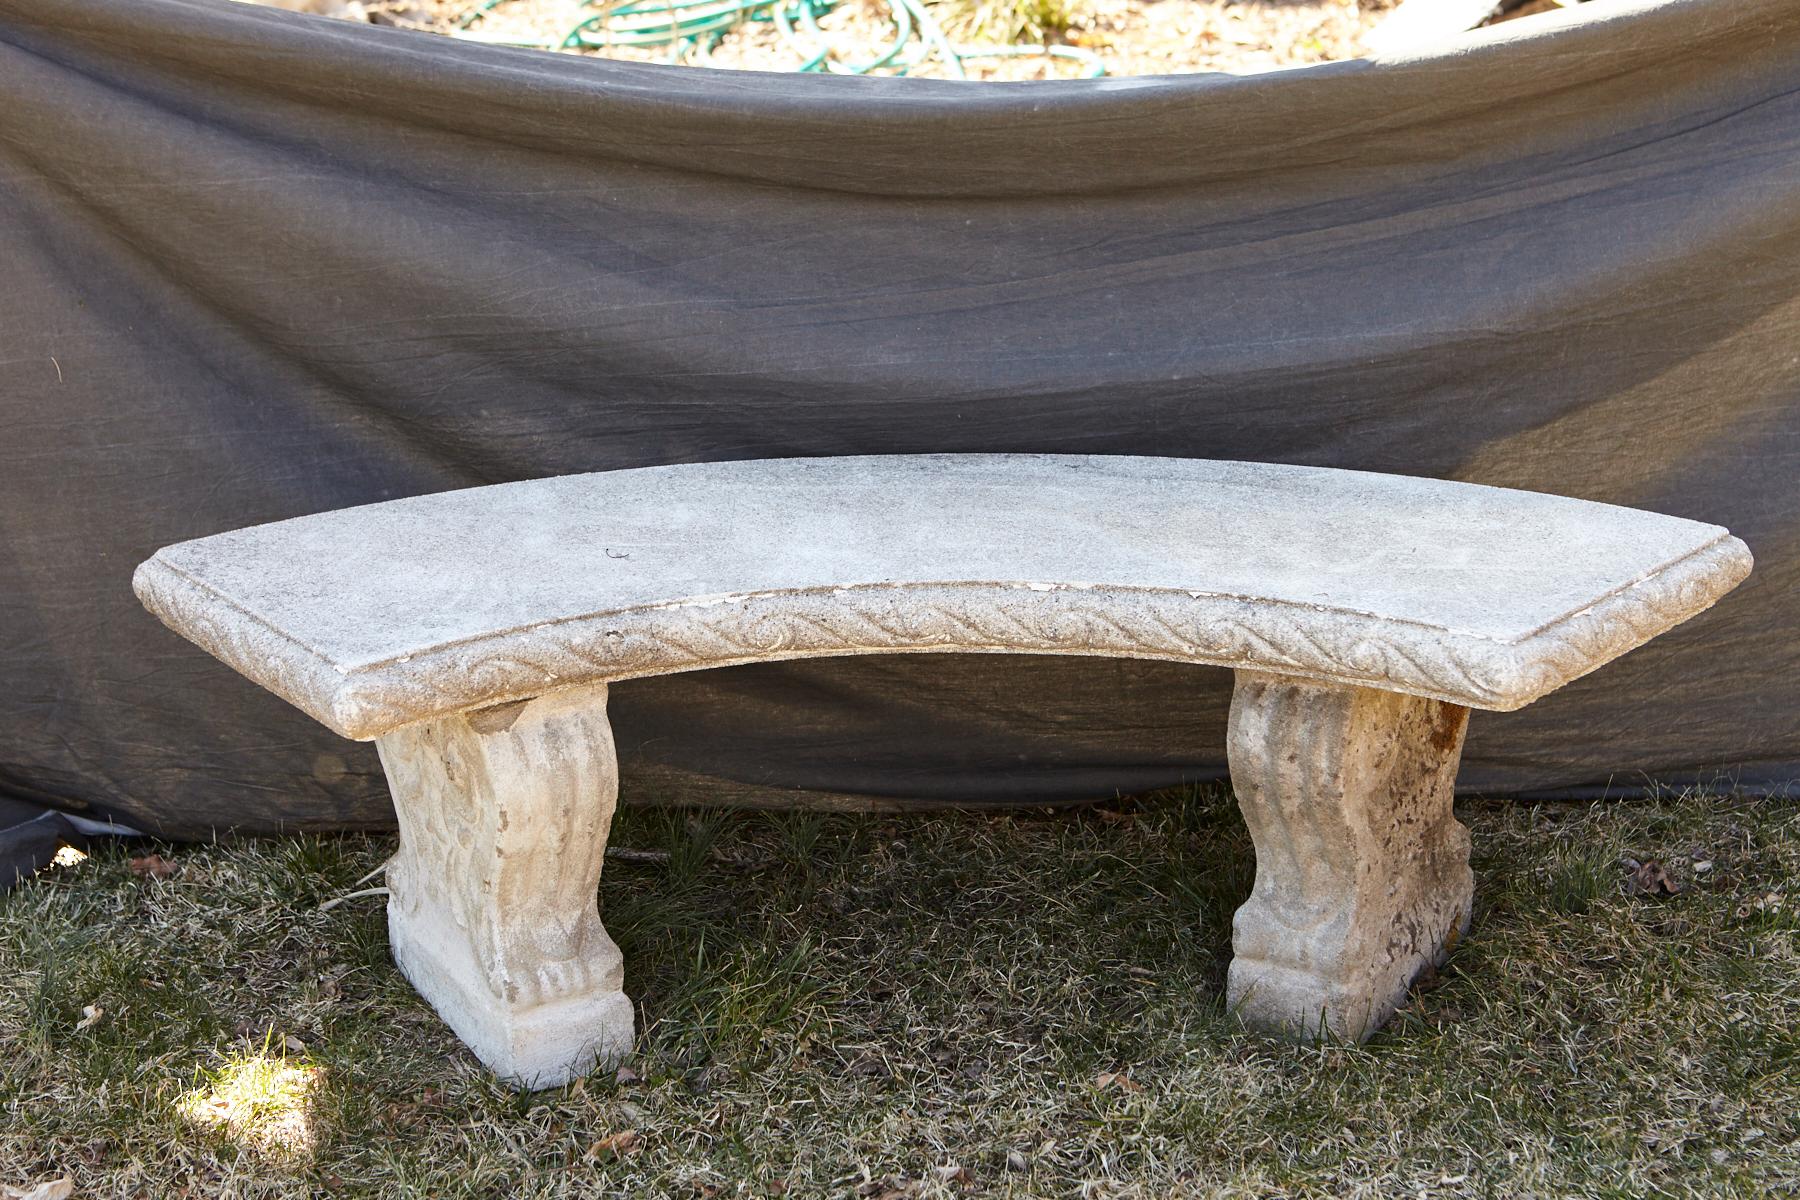 Curved cast stone bench with an ornamental carved band of alternating concave and convex sections around the flat seat, reminiscent of waves, mounted on carved legs with carved double sided scrolled ornaments and leaves.
The bench has a very nice